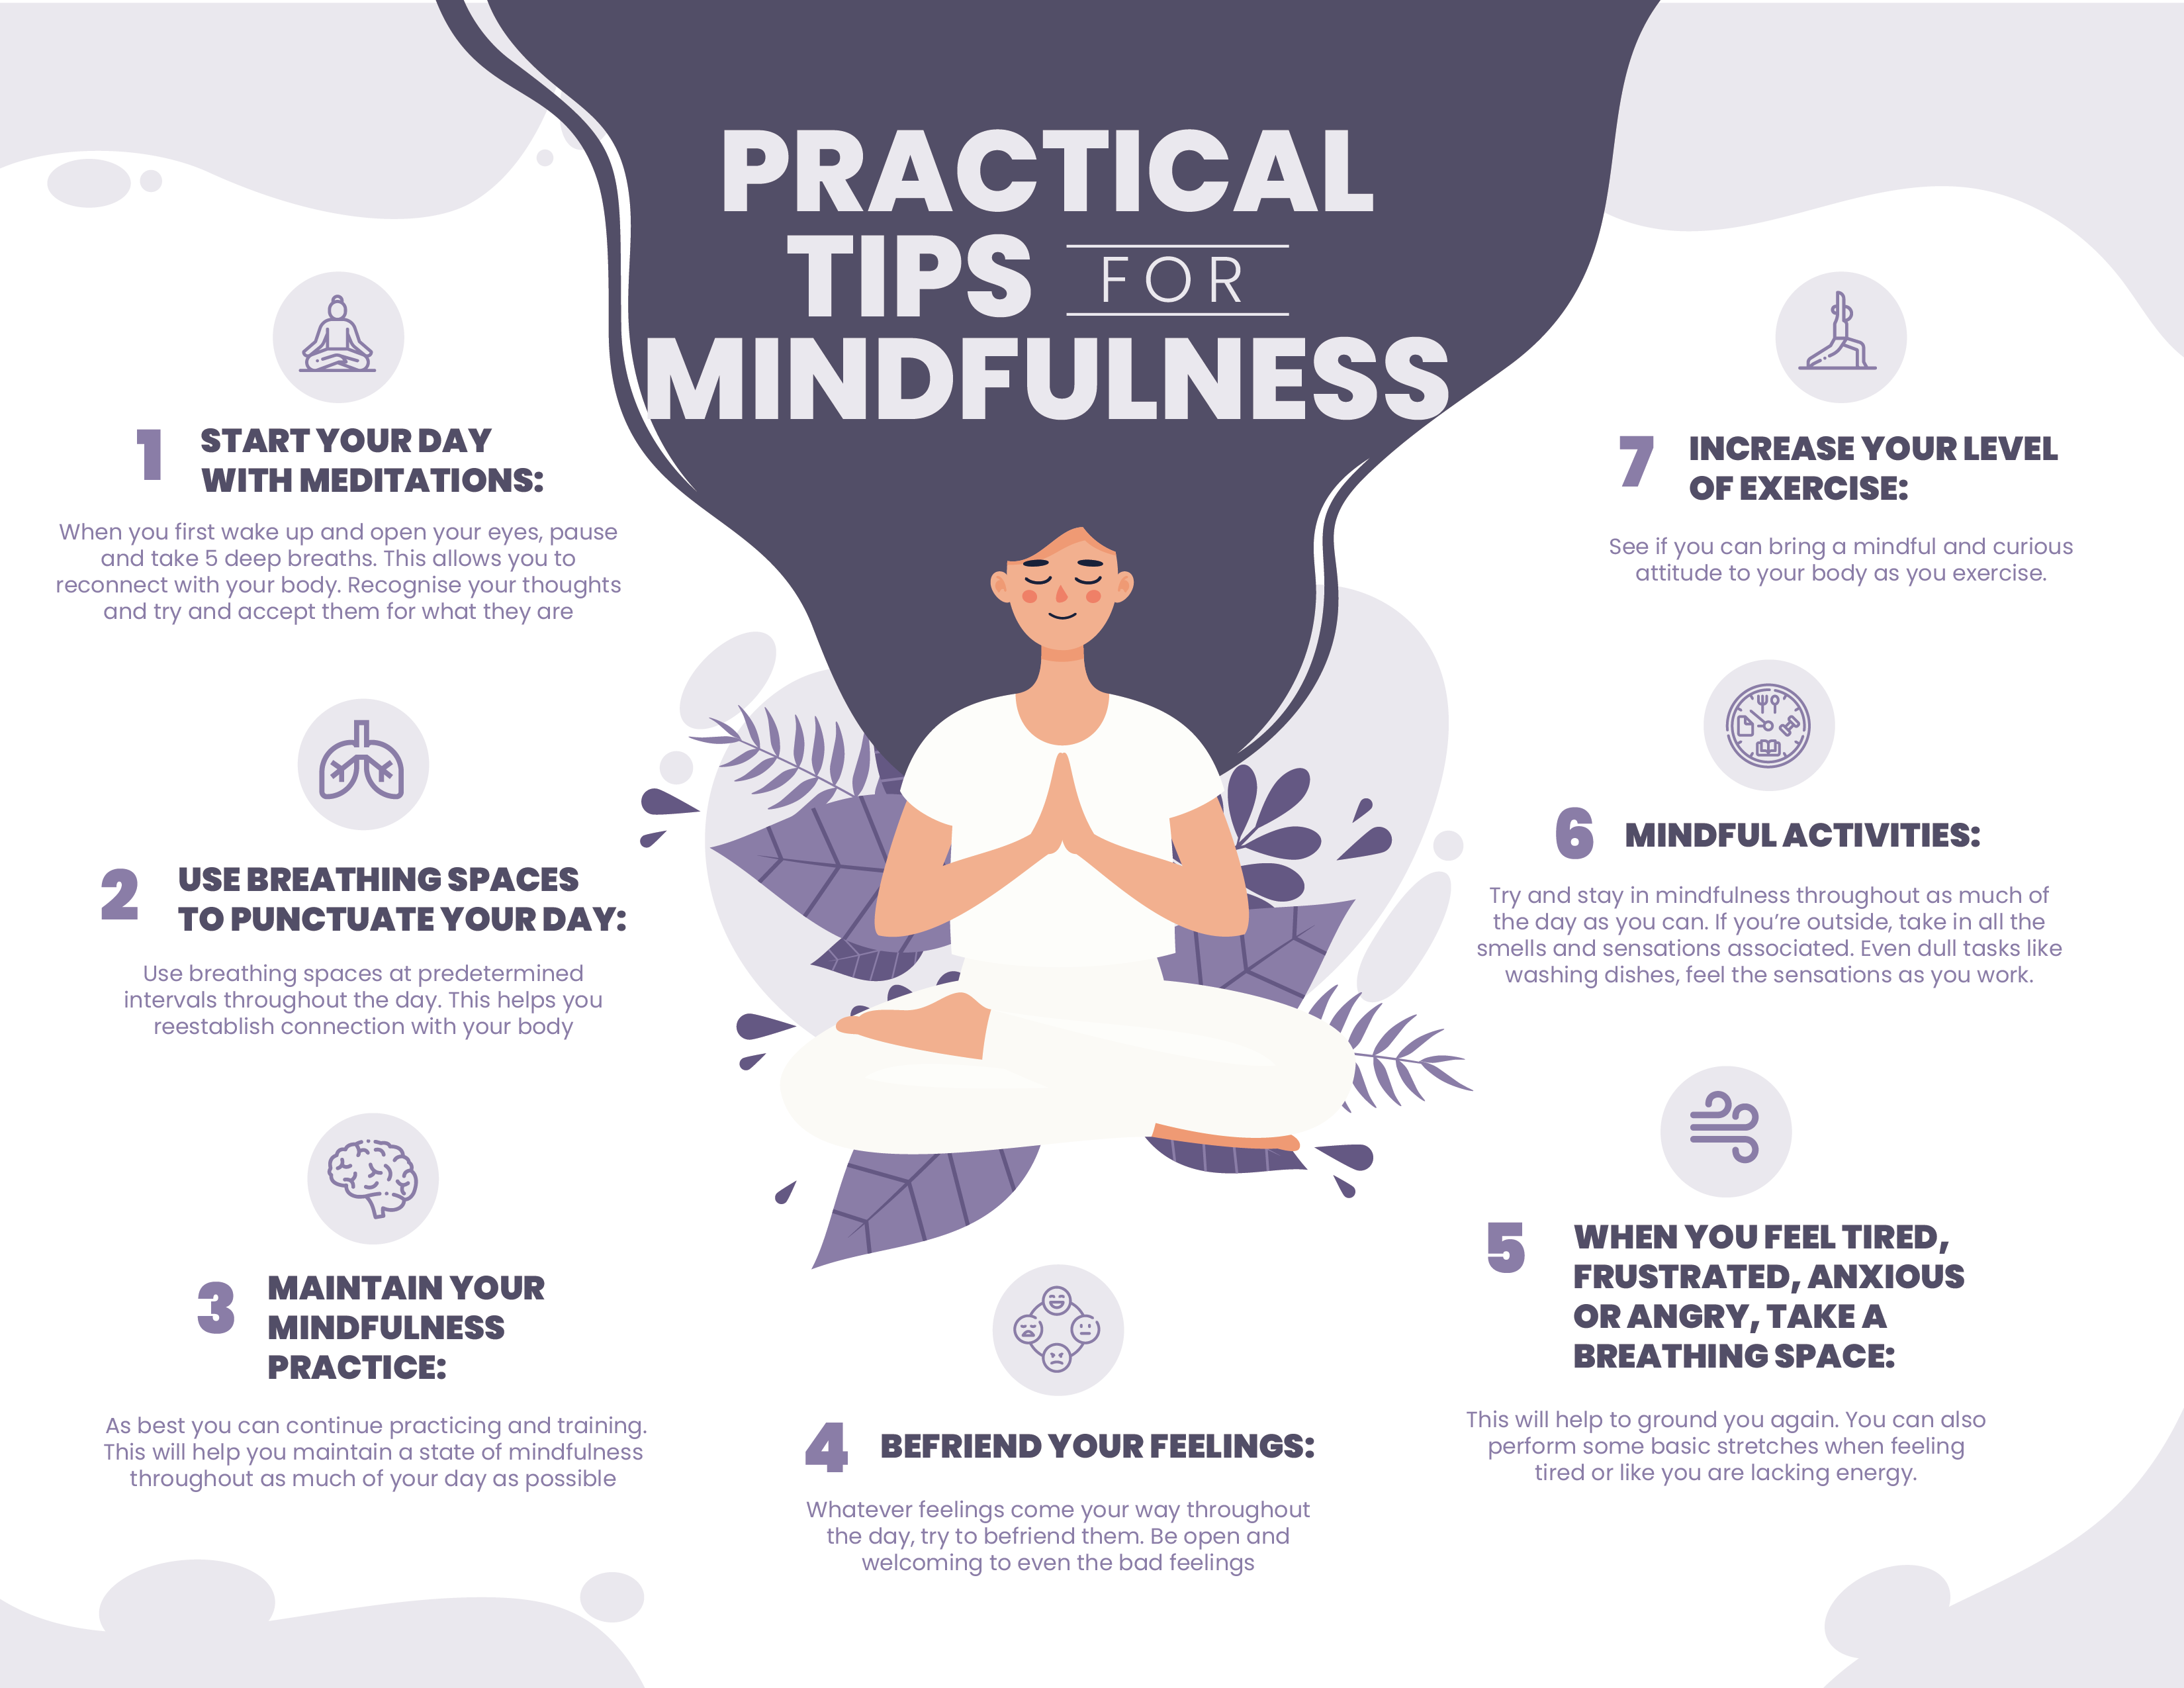 1 Practicing Mindfulness